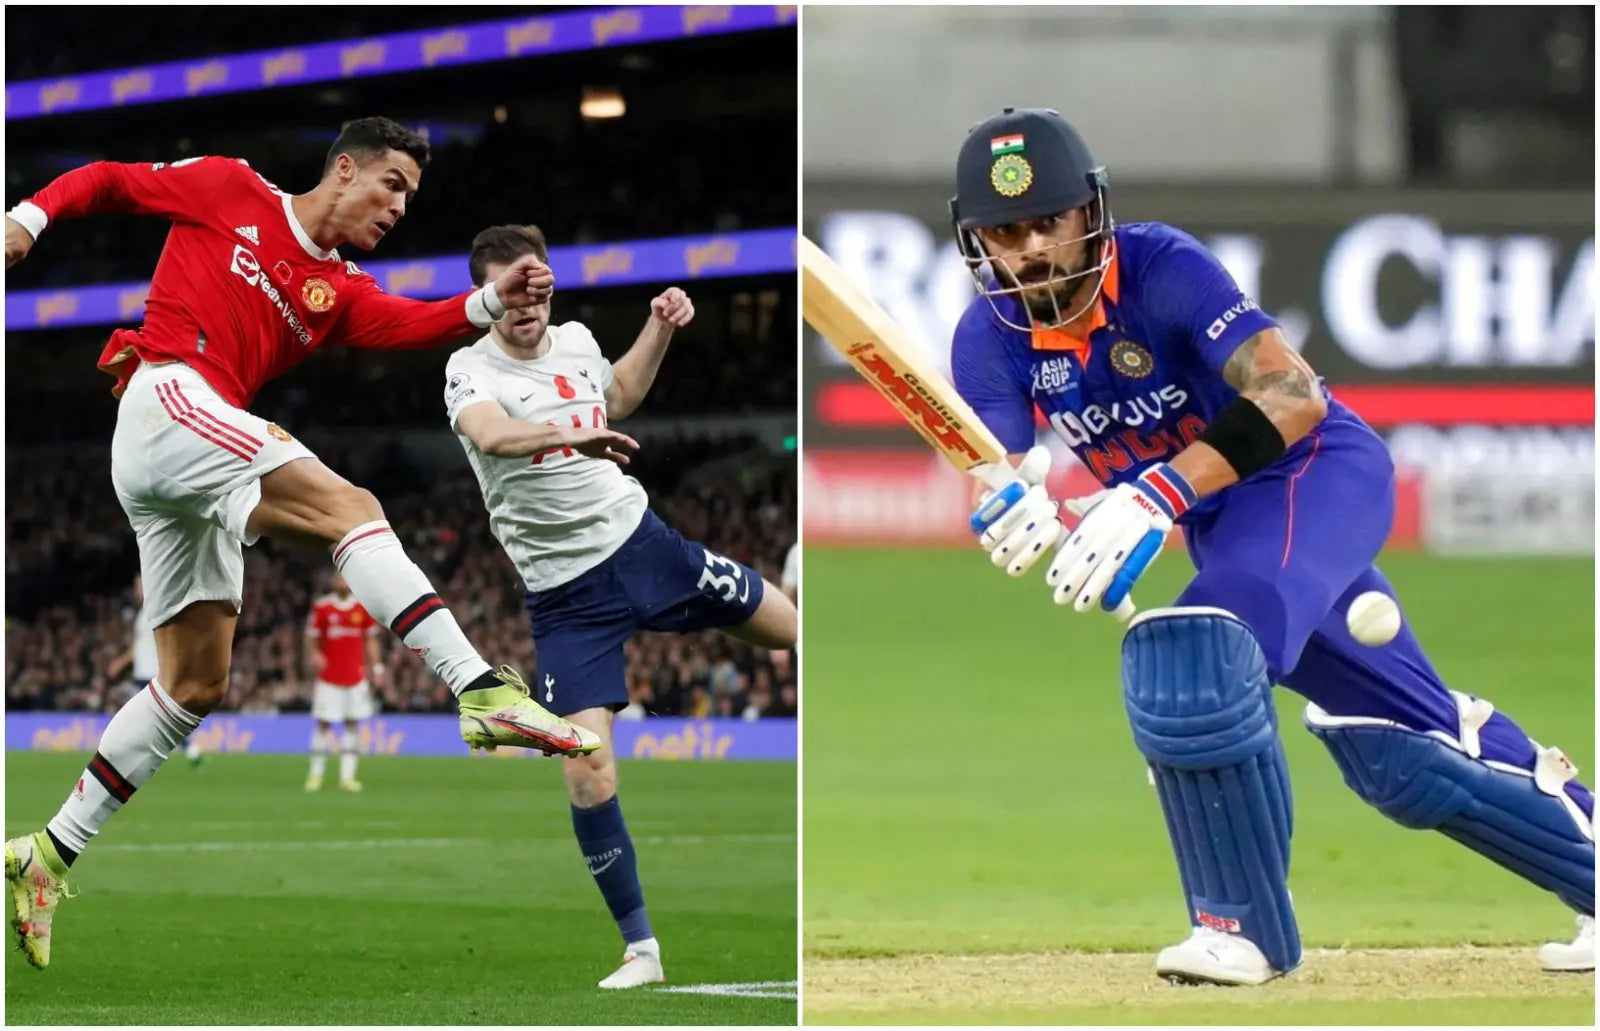 A Collage of Cristiano Ronaldo kicking a football on the left and Virat Kohli playing a cricket shot on the left